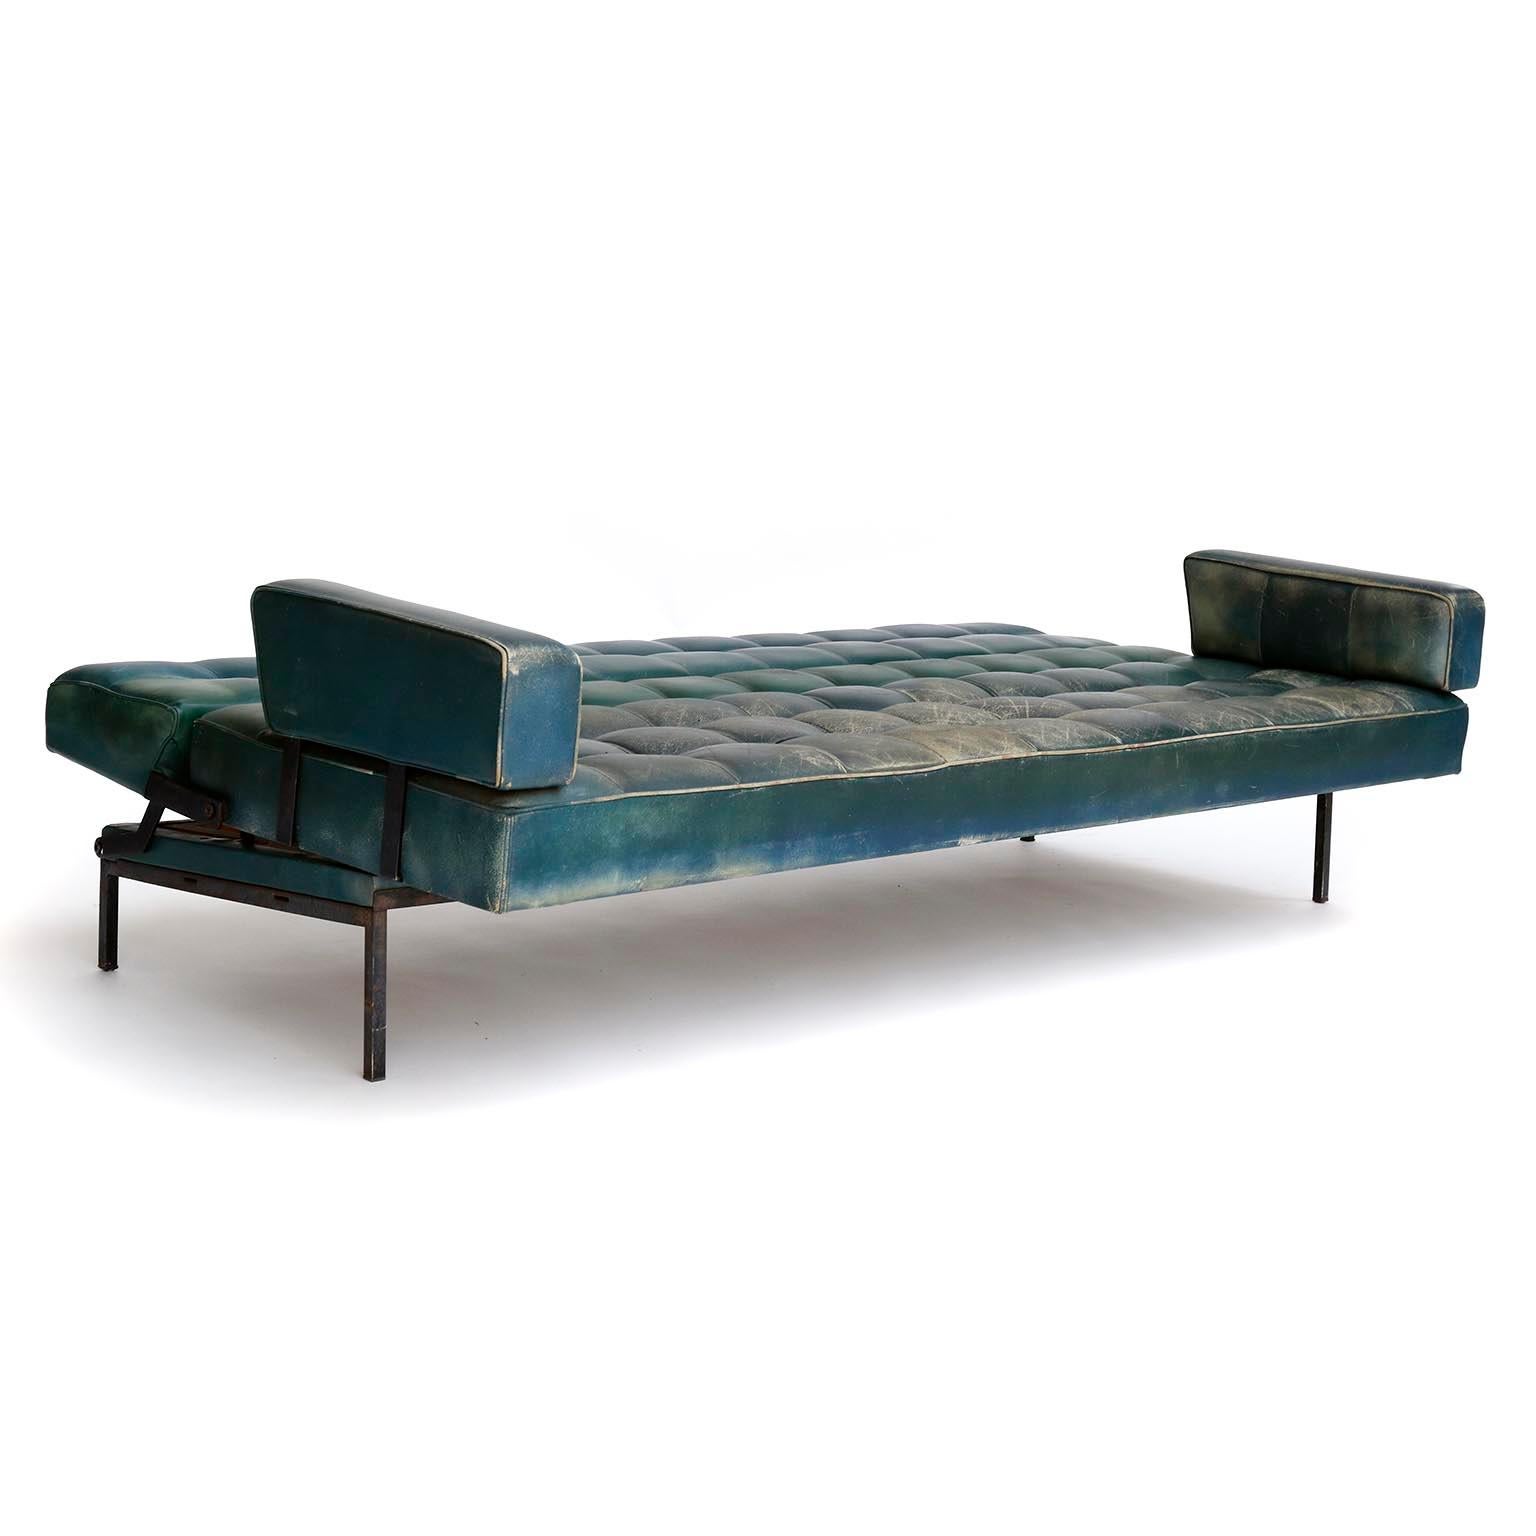 Mid-20th Century Johannes Spalt 'Constanze' Sofa Daybed Armrests, Patinated Green Leather, 1960s